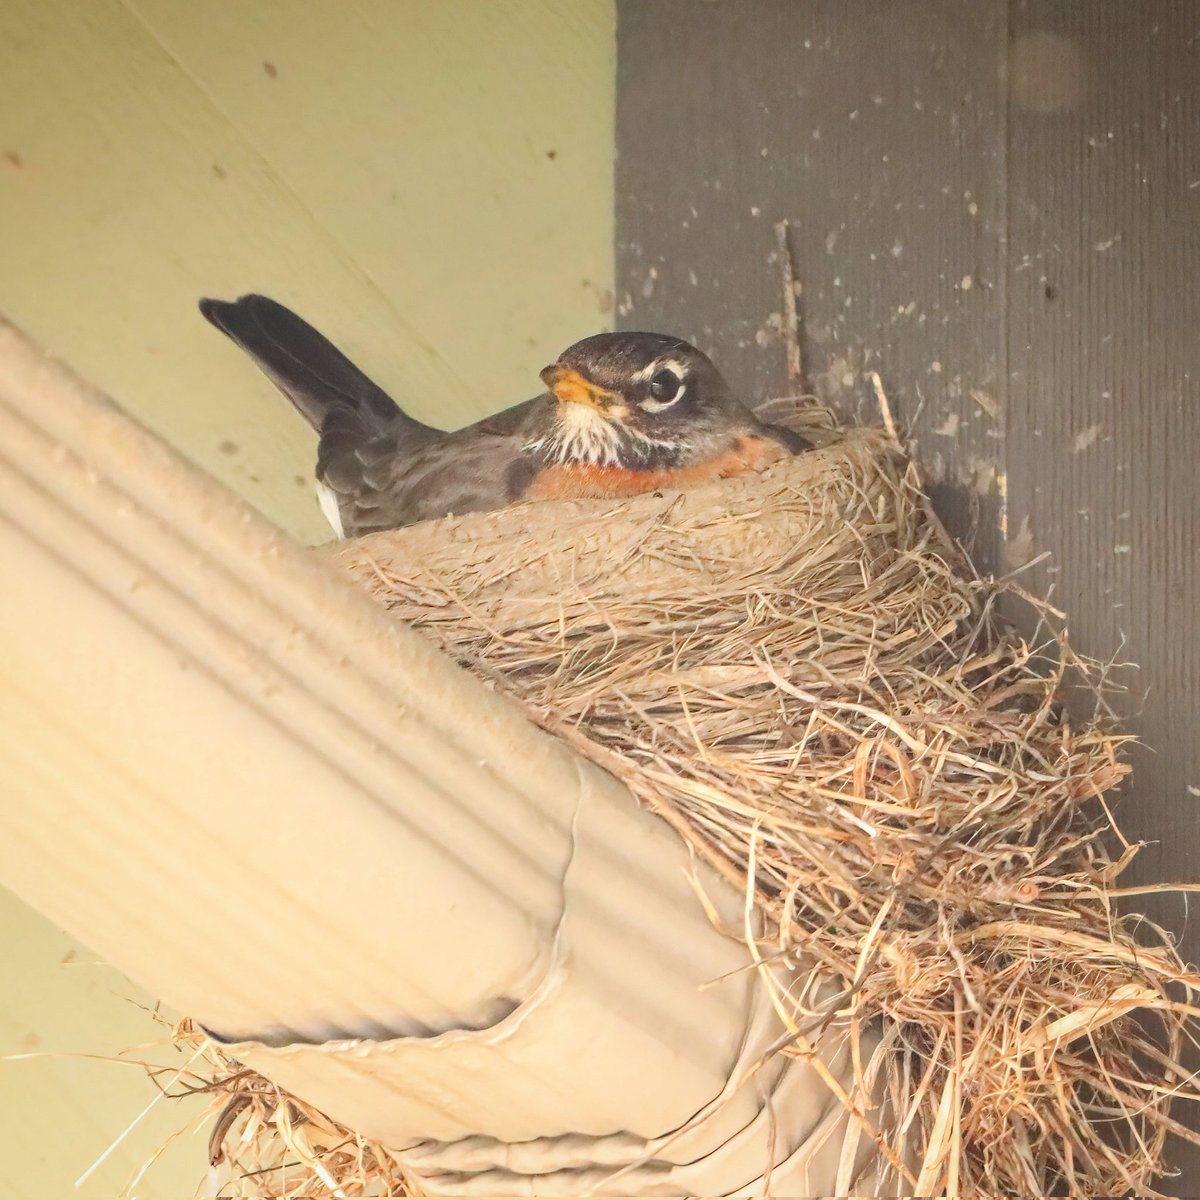 Our office building has a new visitor! I am impressed by this American robin's substantial nest!
#americanrobins #americanrobin #robins #robin #nest #nesting #ohiobirdworld #ohiobirdlovers #eatonohiobirders #eaton #eatonohio #eatonoh #birdlife #preblecounty #preble #birding